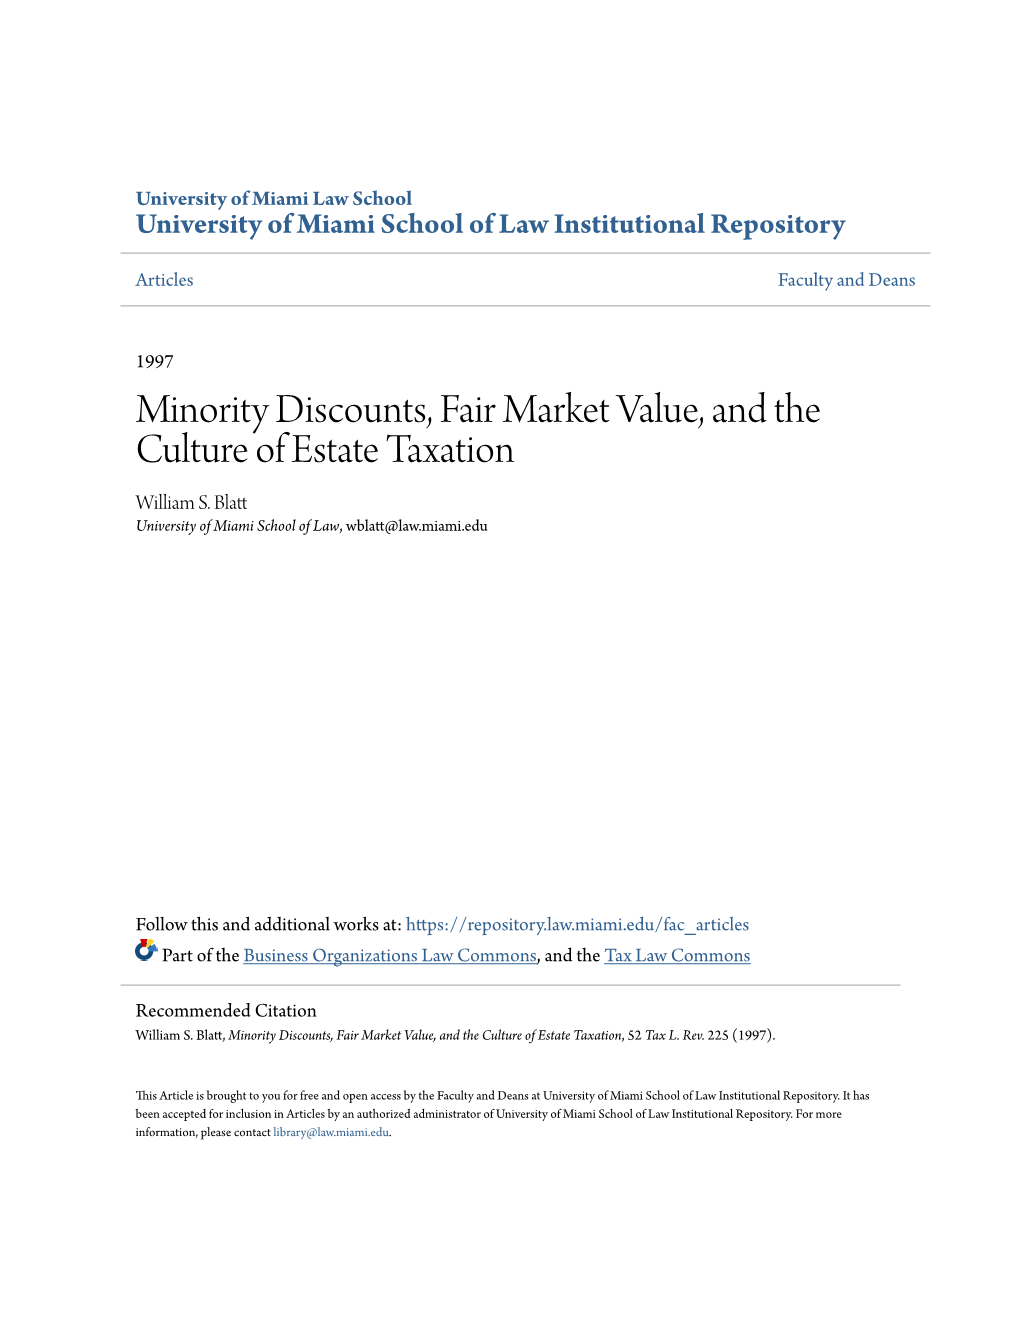 Minority Discounts, Fair Market Value, and the Culture of Estate Taxation William S